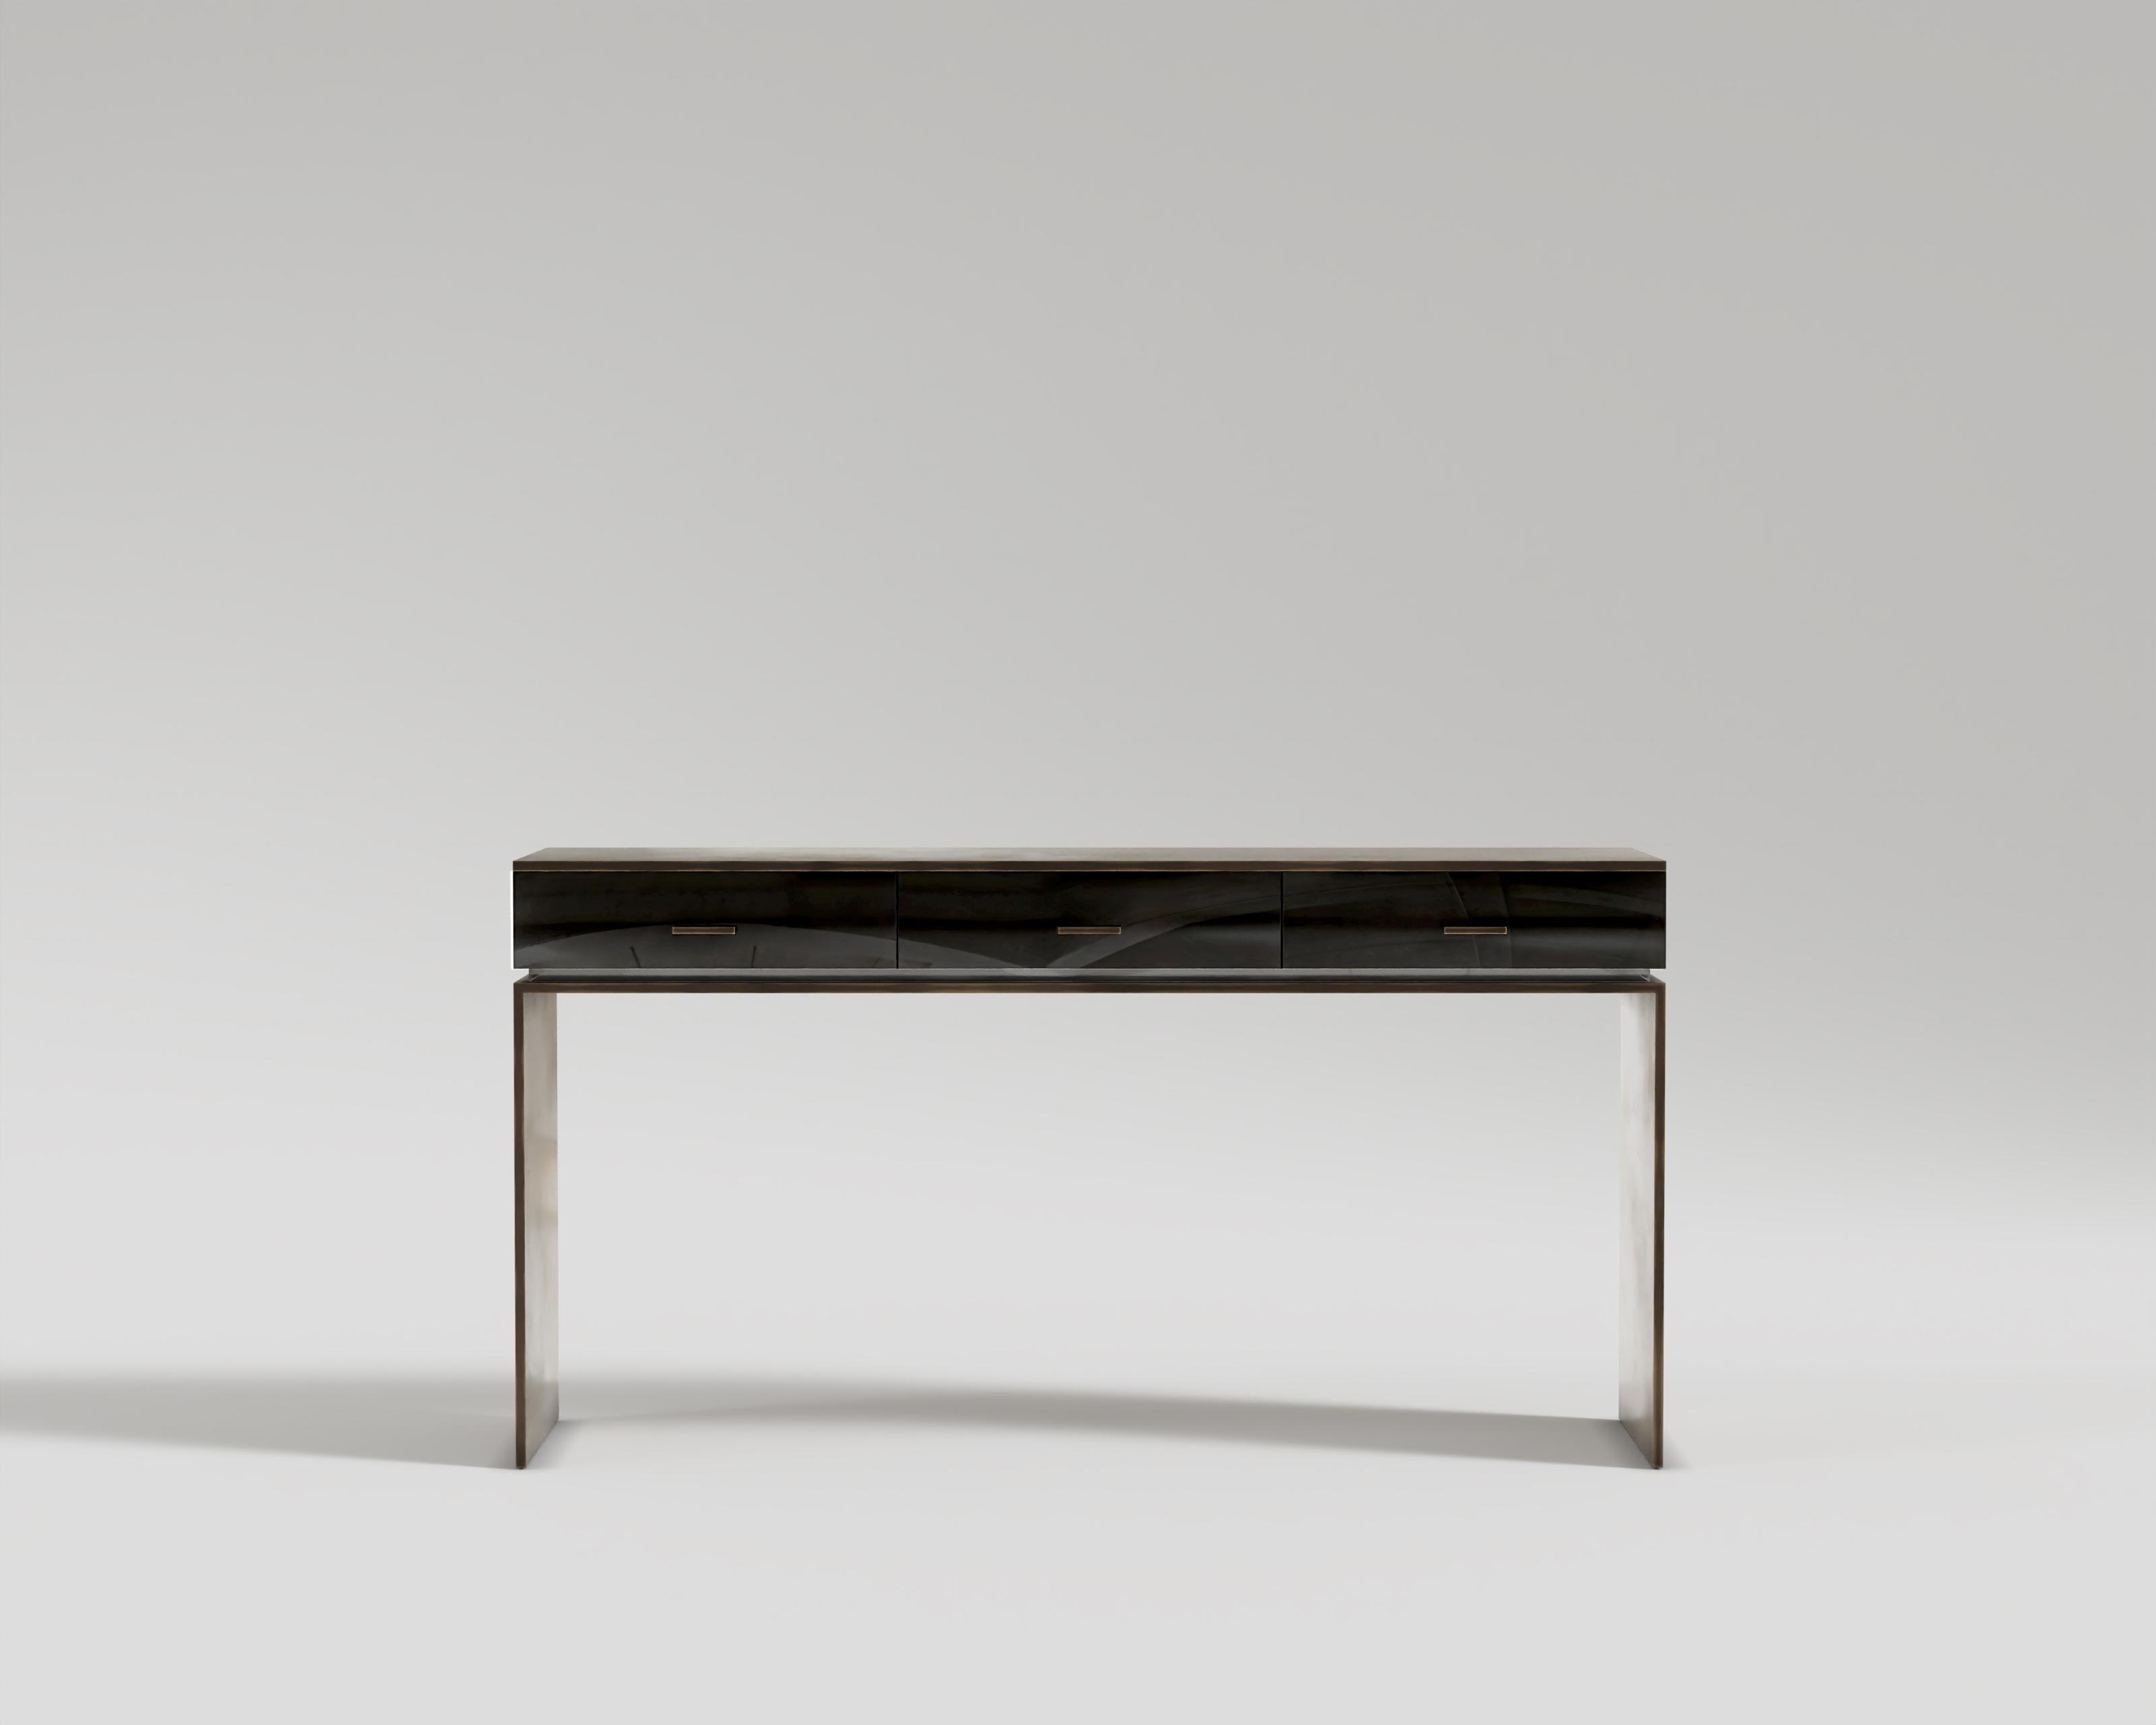 Block Console
Fresh, and captivating embodiment of the Block console sweep you into a floating of delight. The gorgeous patine bronze is a beautiful contrast to the black lacquer and plexiglass which gives us a masterpiece of modernity.

Materials